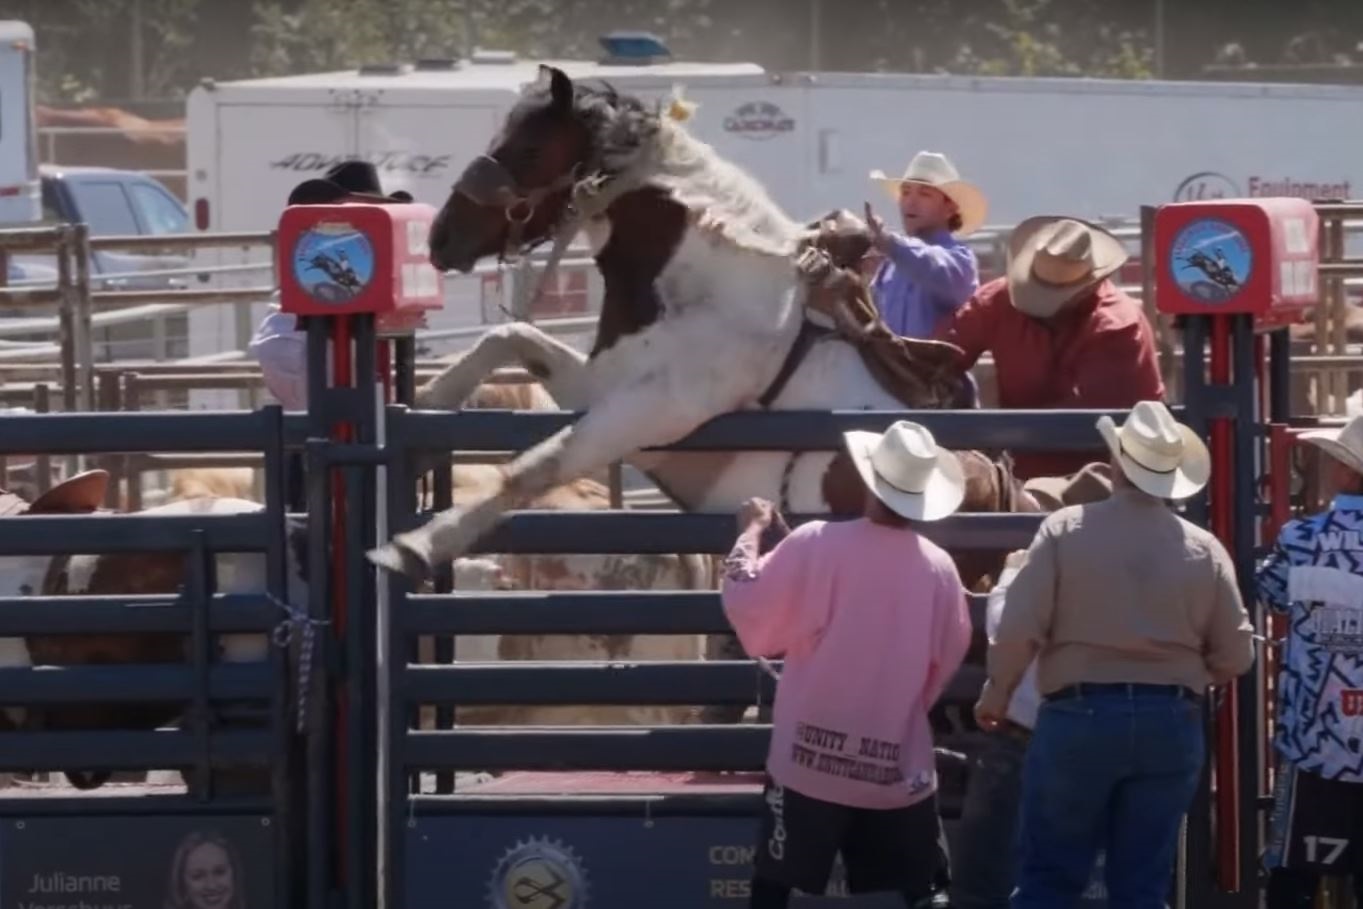 Image shows horse bucking at rodeo